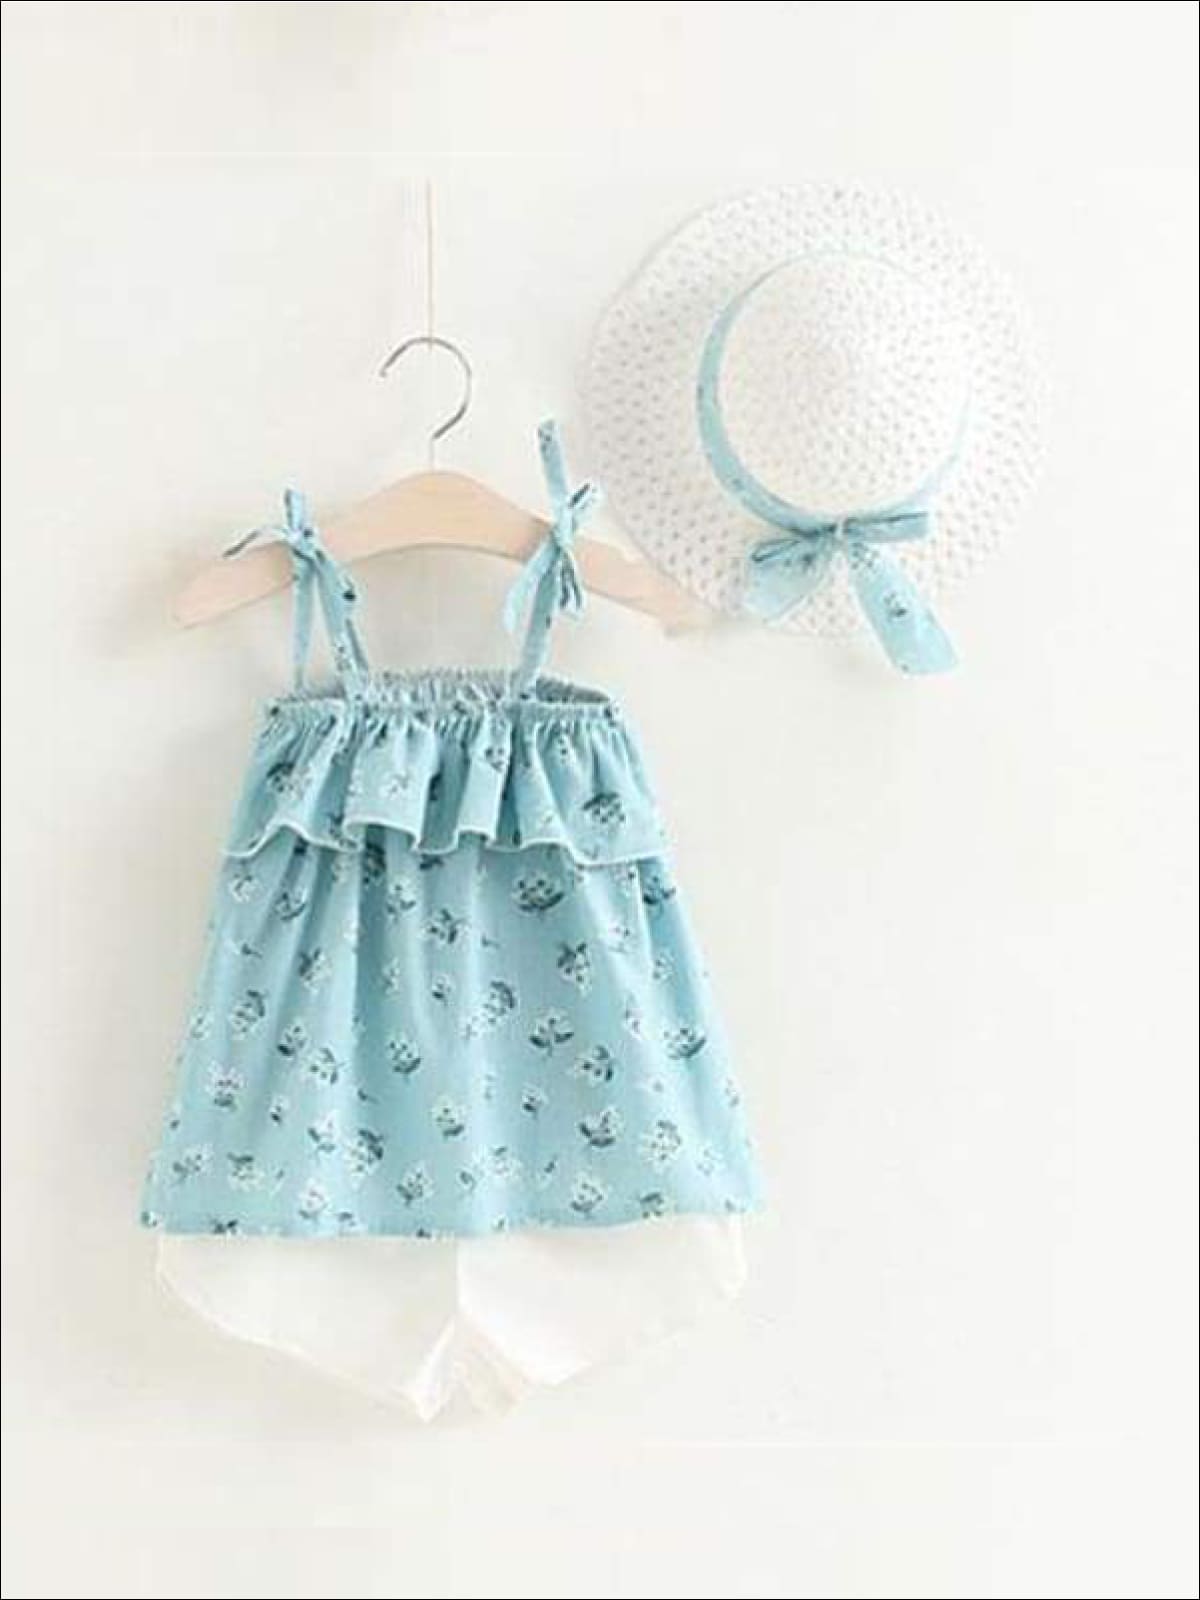 Girls Sleeveless Floral Print Tunic & White Shorts Set with Matching Sun Hat - Sky Blue / 2T - Casual Spring Set